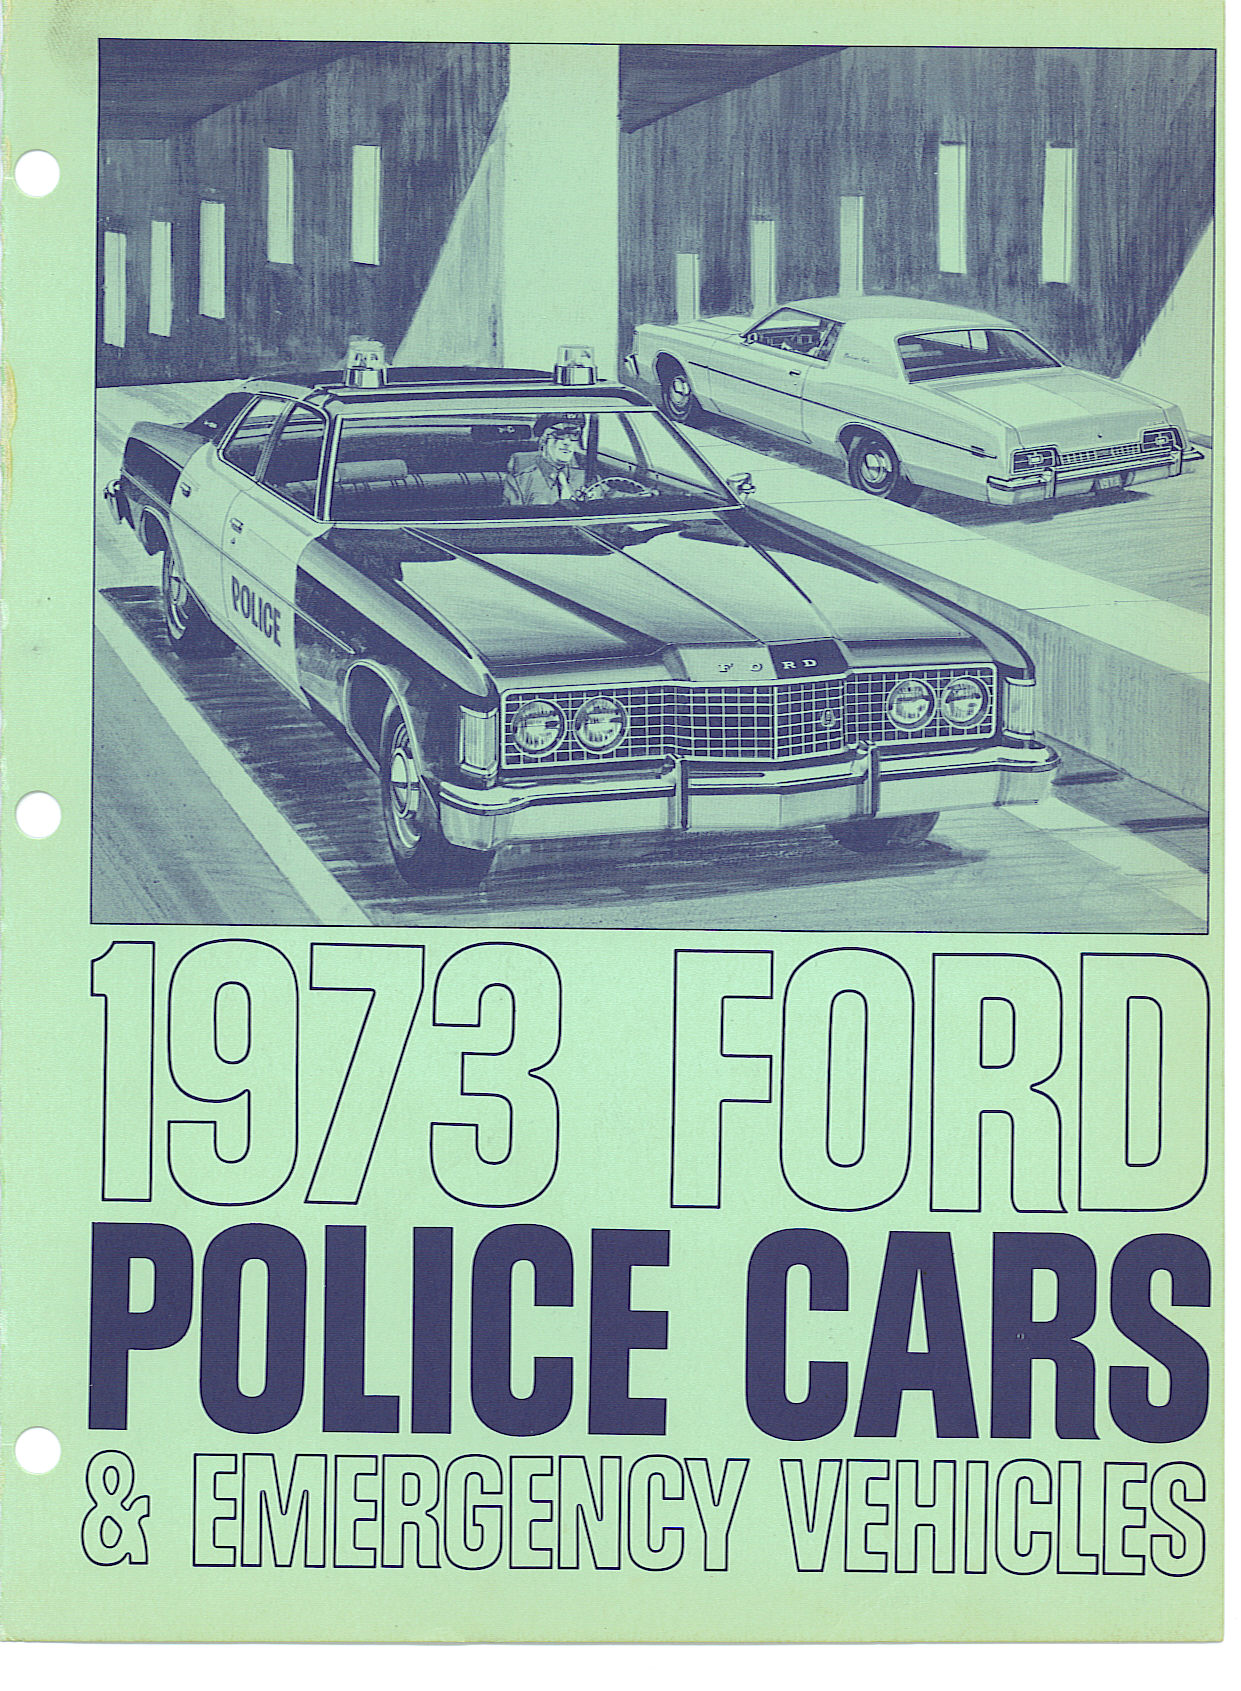 1973 Ford Police Cars